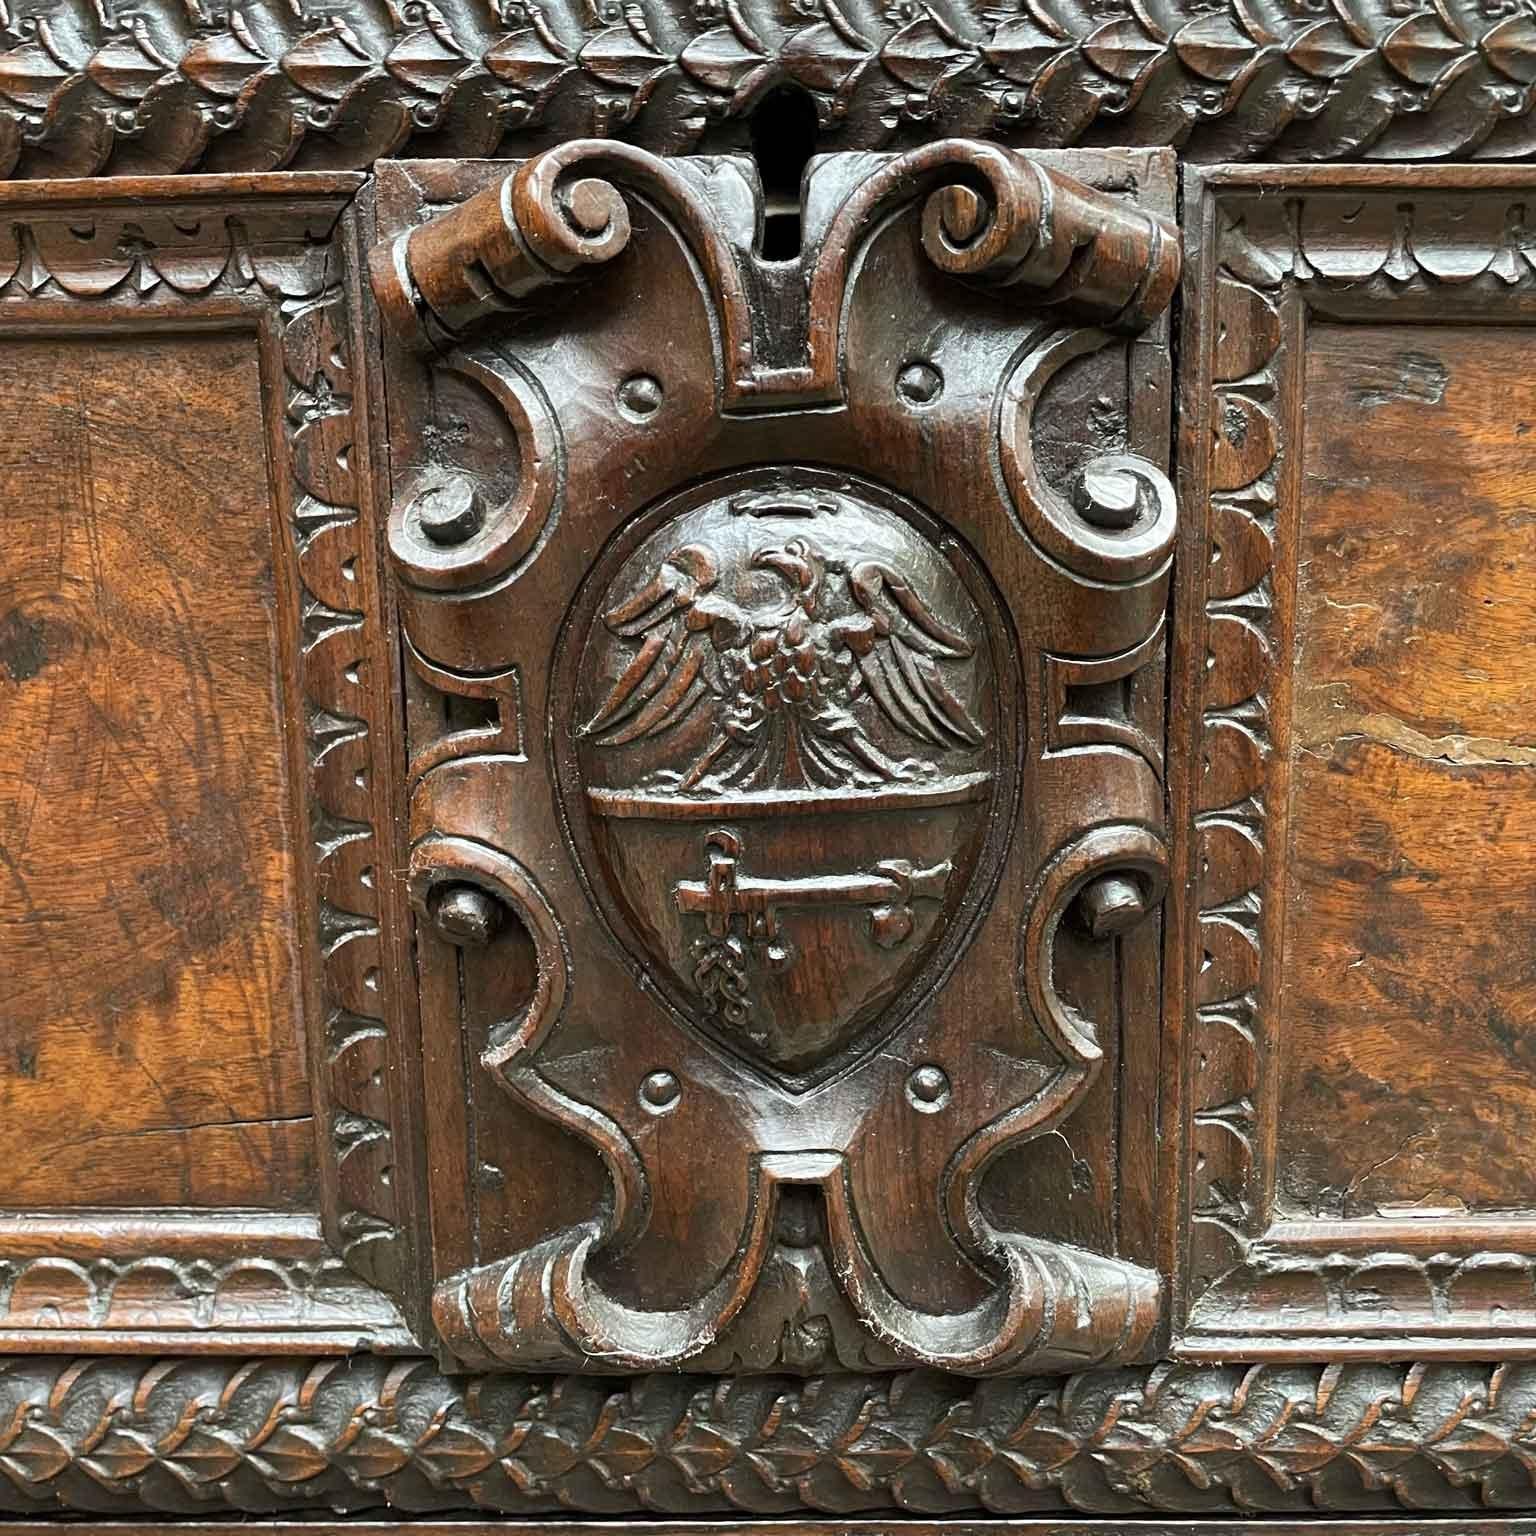 From Italy,  Bergamo this fabulous, beautifully hand-carved walnut wood trunk was made in the 1600s. The top and sides have no decoration, reserving the attention for the elaborate front panel, with Coat of Arms  of Pesenty family in Bergamo, a